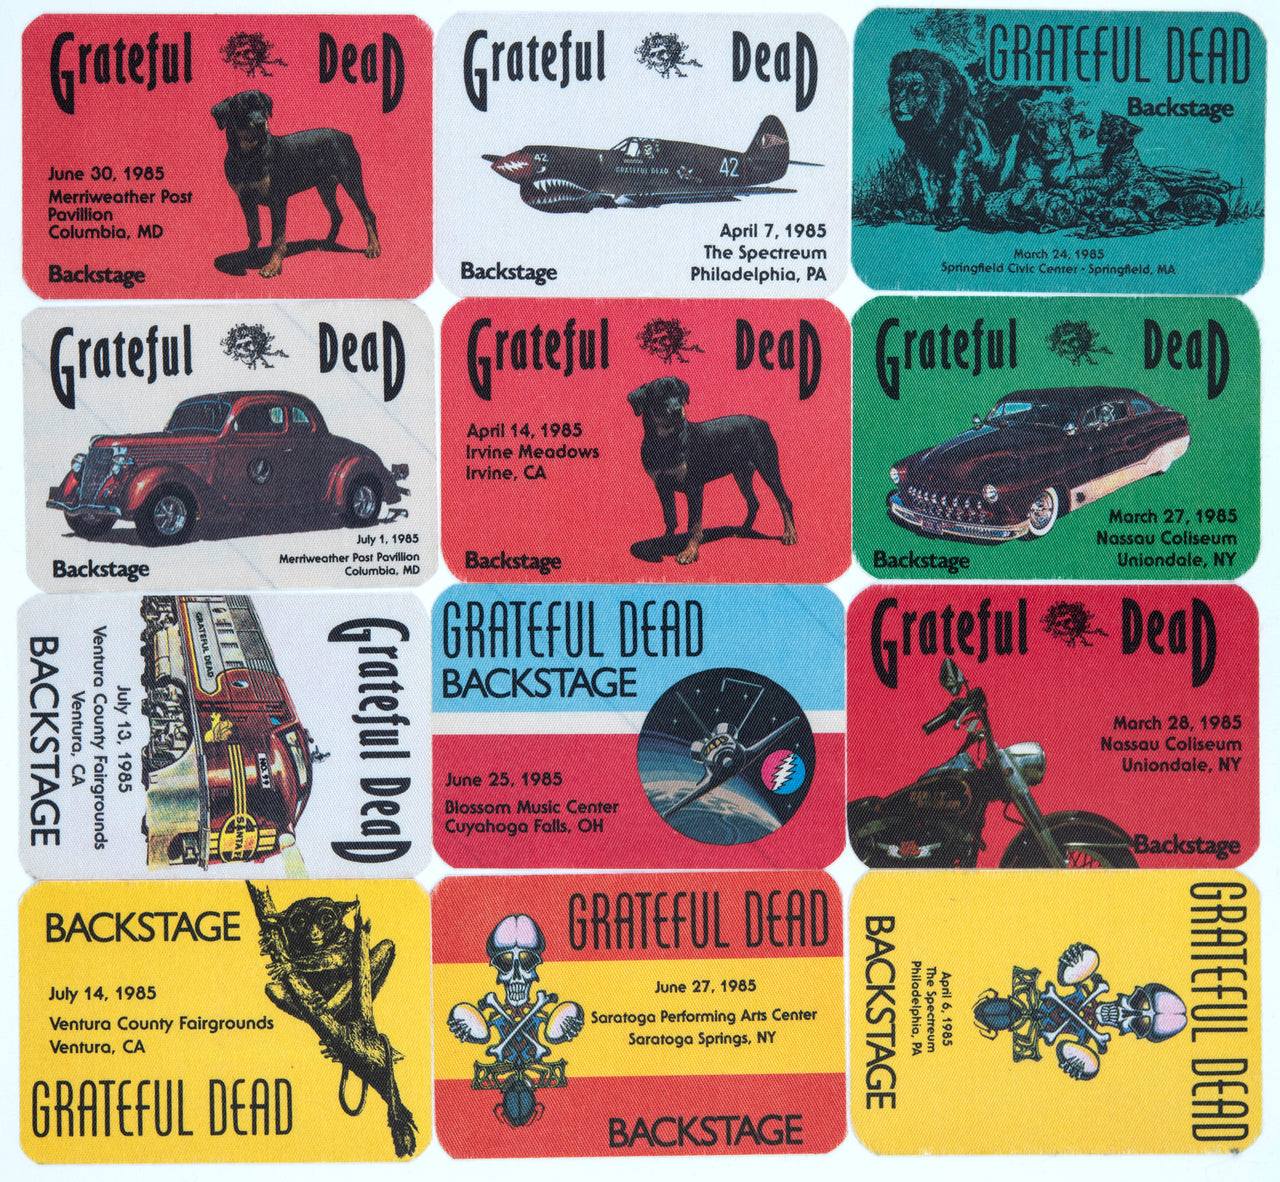 Grateful Dead Backstage Passes (3/24/1985 - 7/14/1985) from Dan Healy